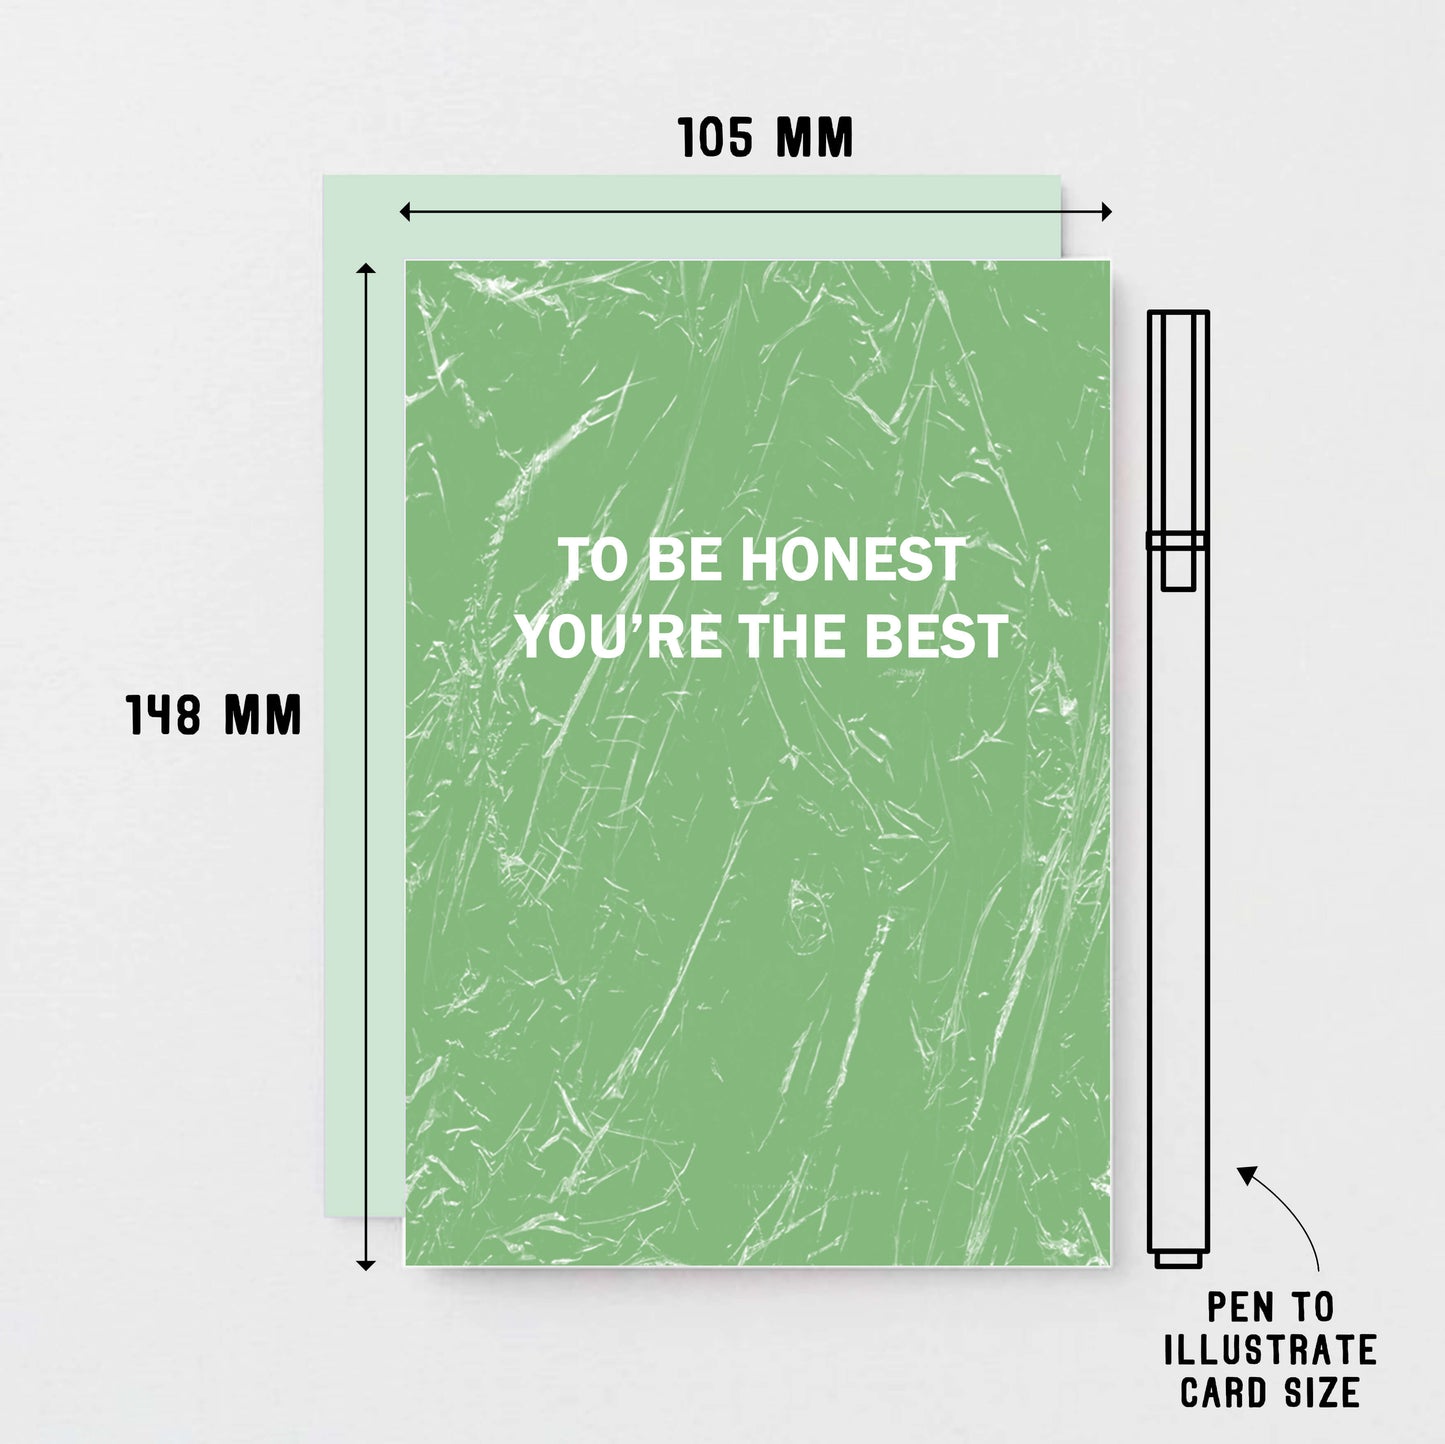 Friendship Card by SixElevenCreations. Reads To be honest You're the best. Product Code SE3059A6